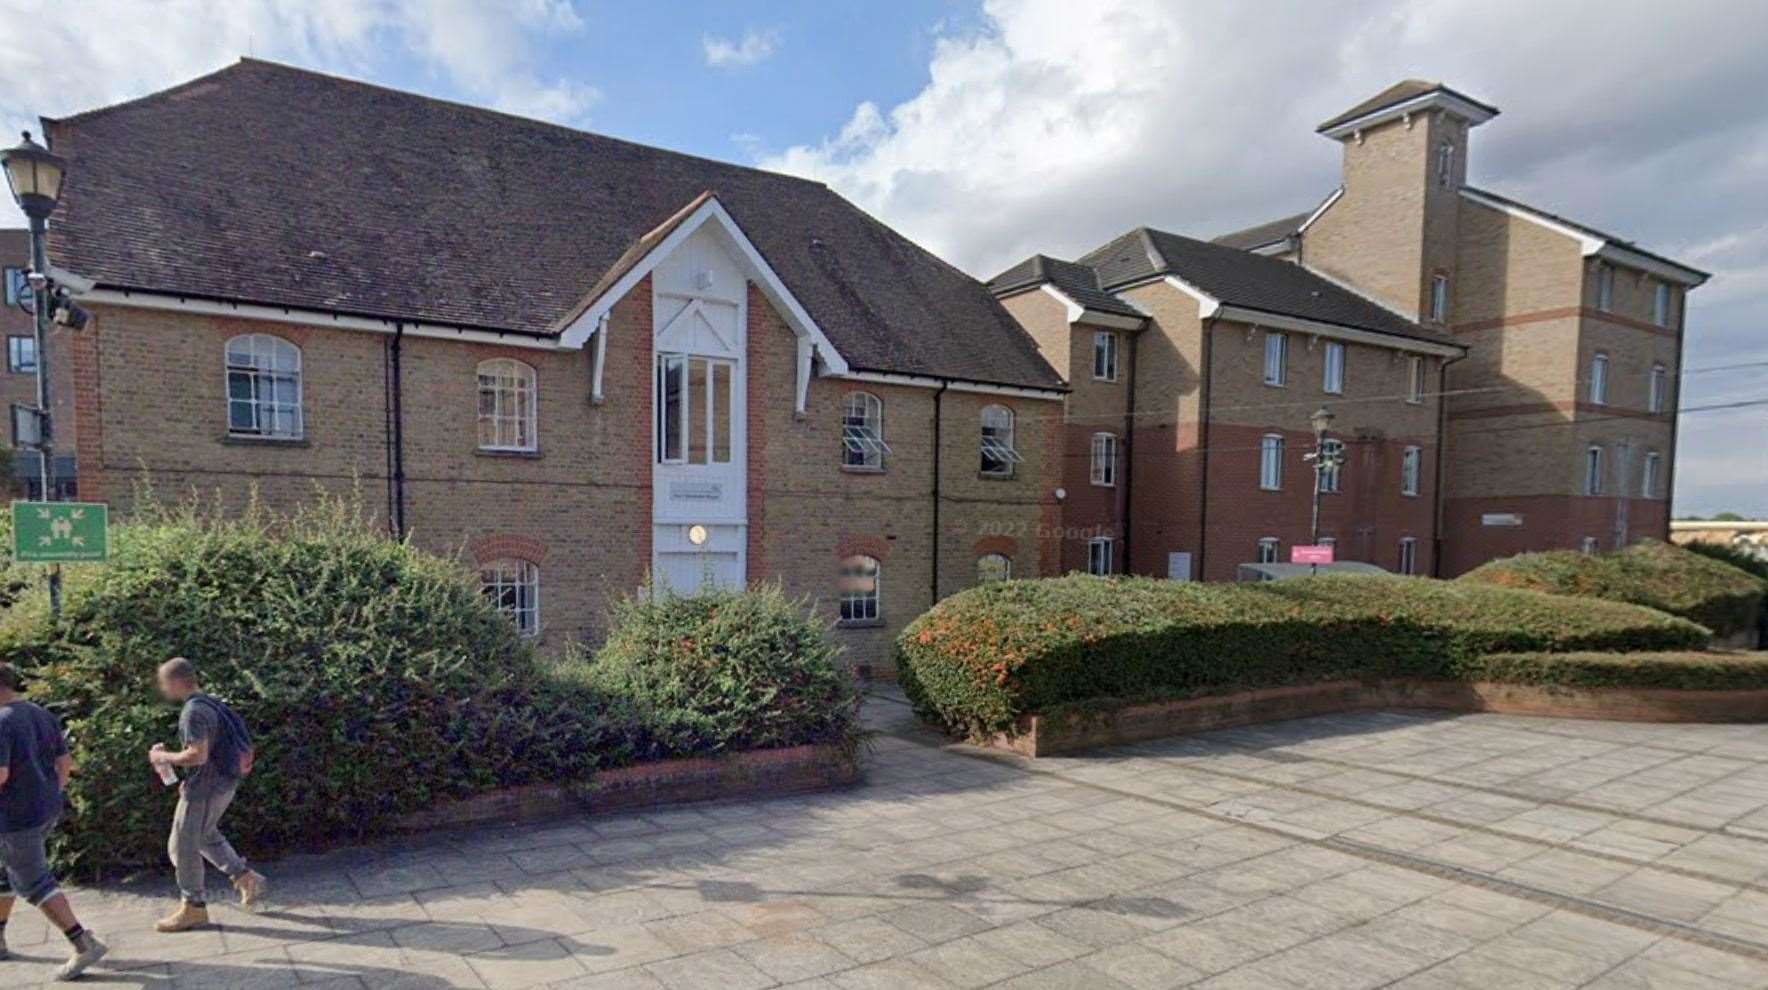 Sheldrake House and Dolphin House student accommodation in Rochester which could become HMOs